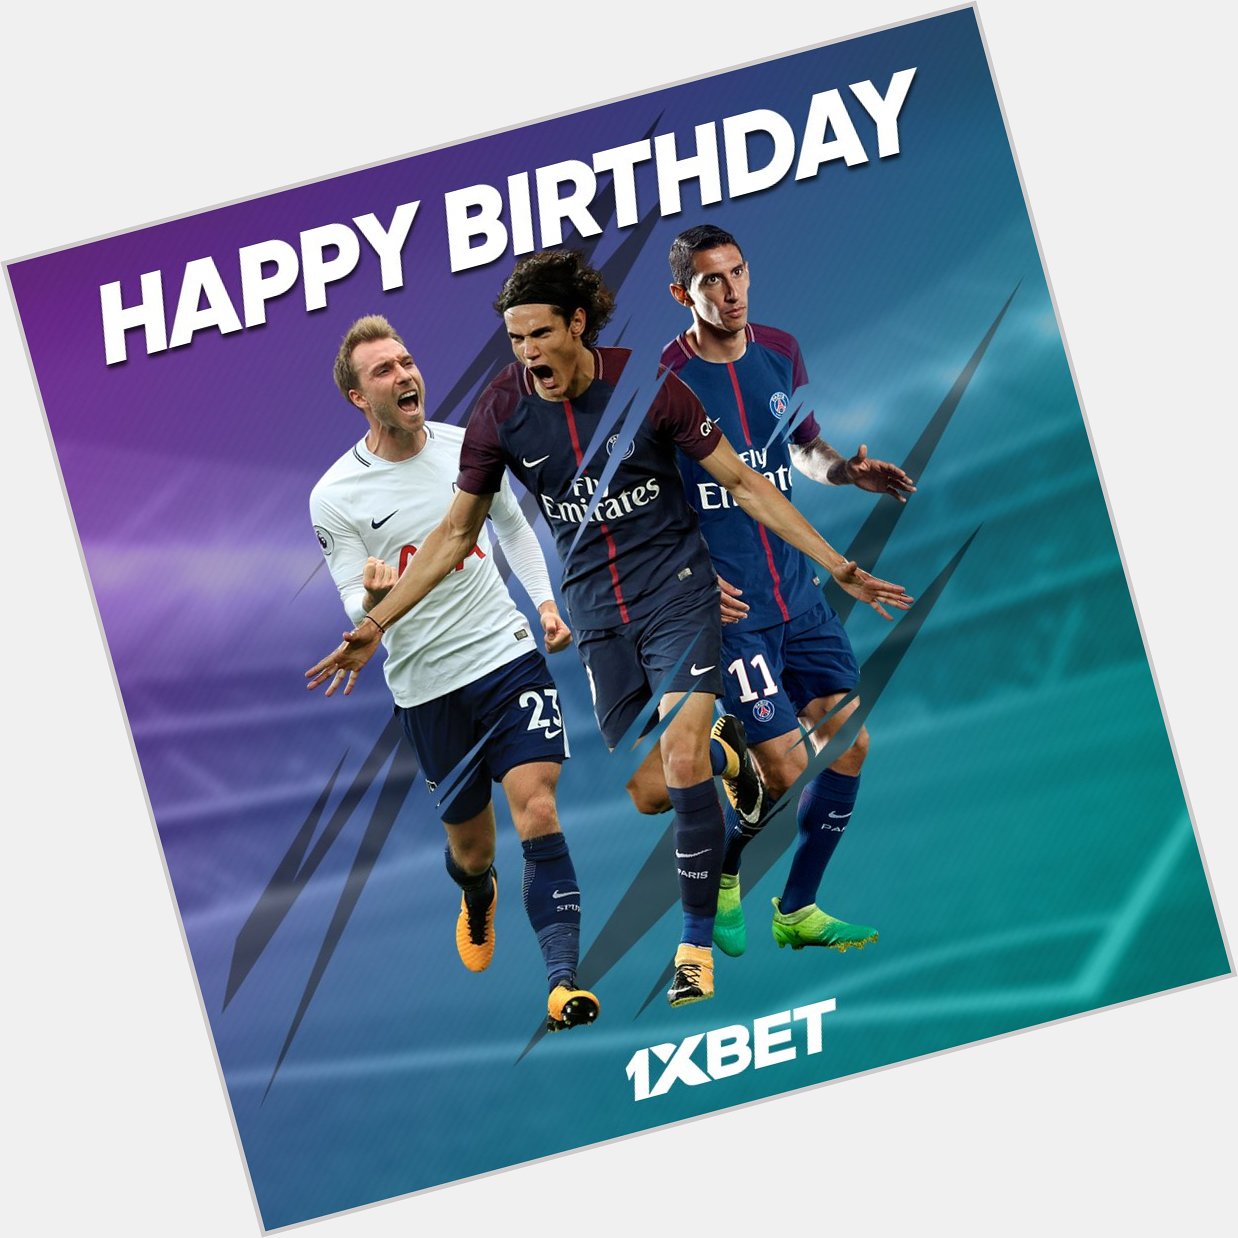 Other ballers were born this day! Happy birthday Kristian  , Angel  and Edinson  ! 